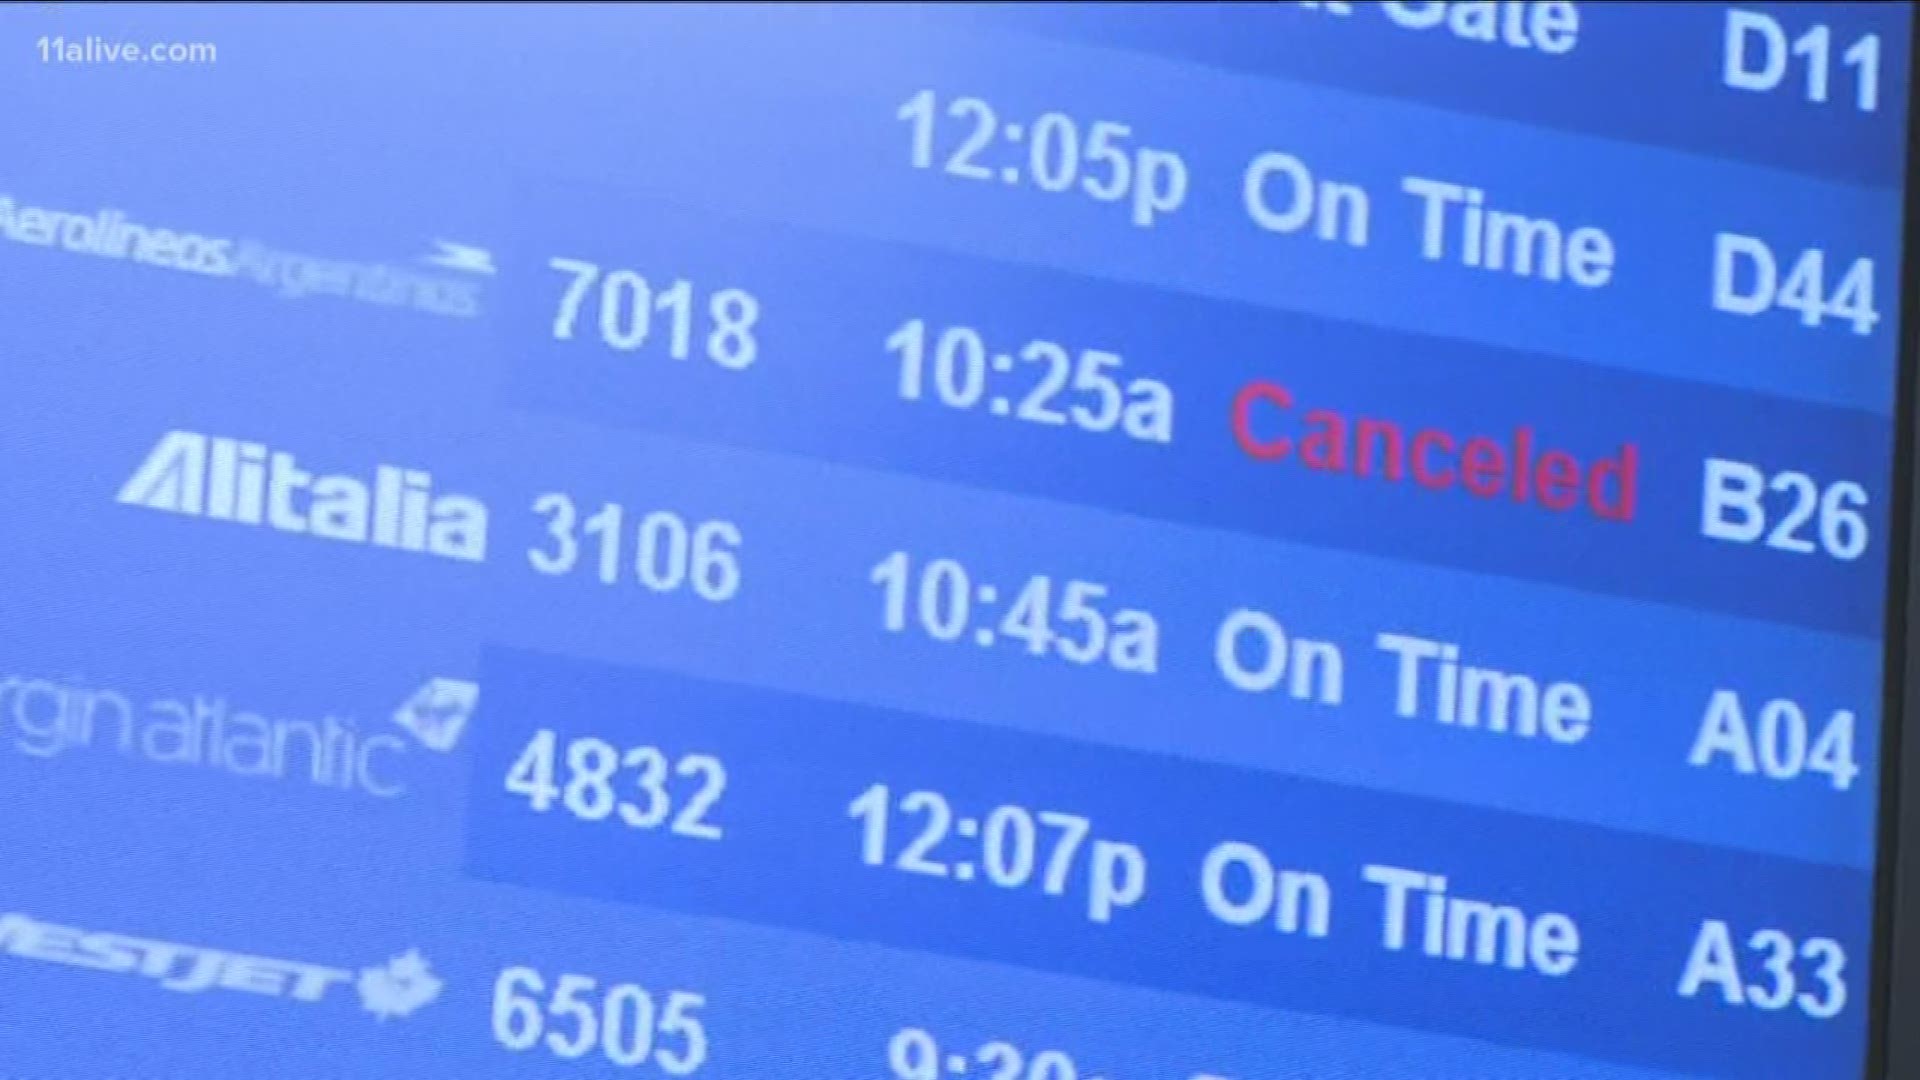 As the storm made its way inland, flights were canceled heading into the Gulf Coast.